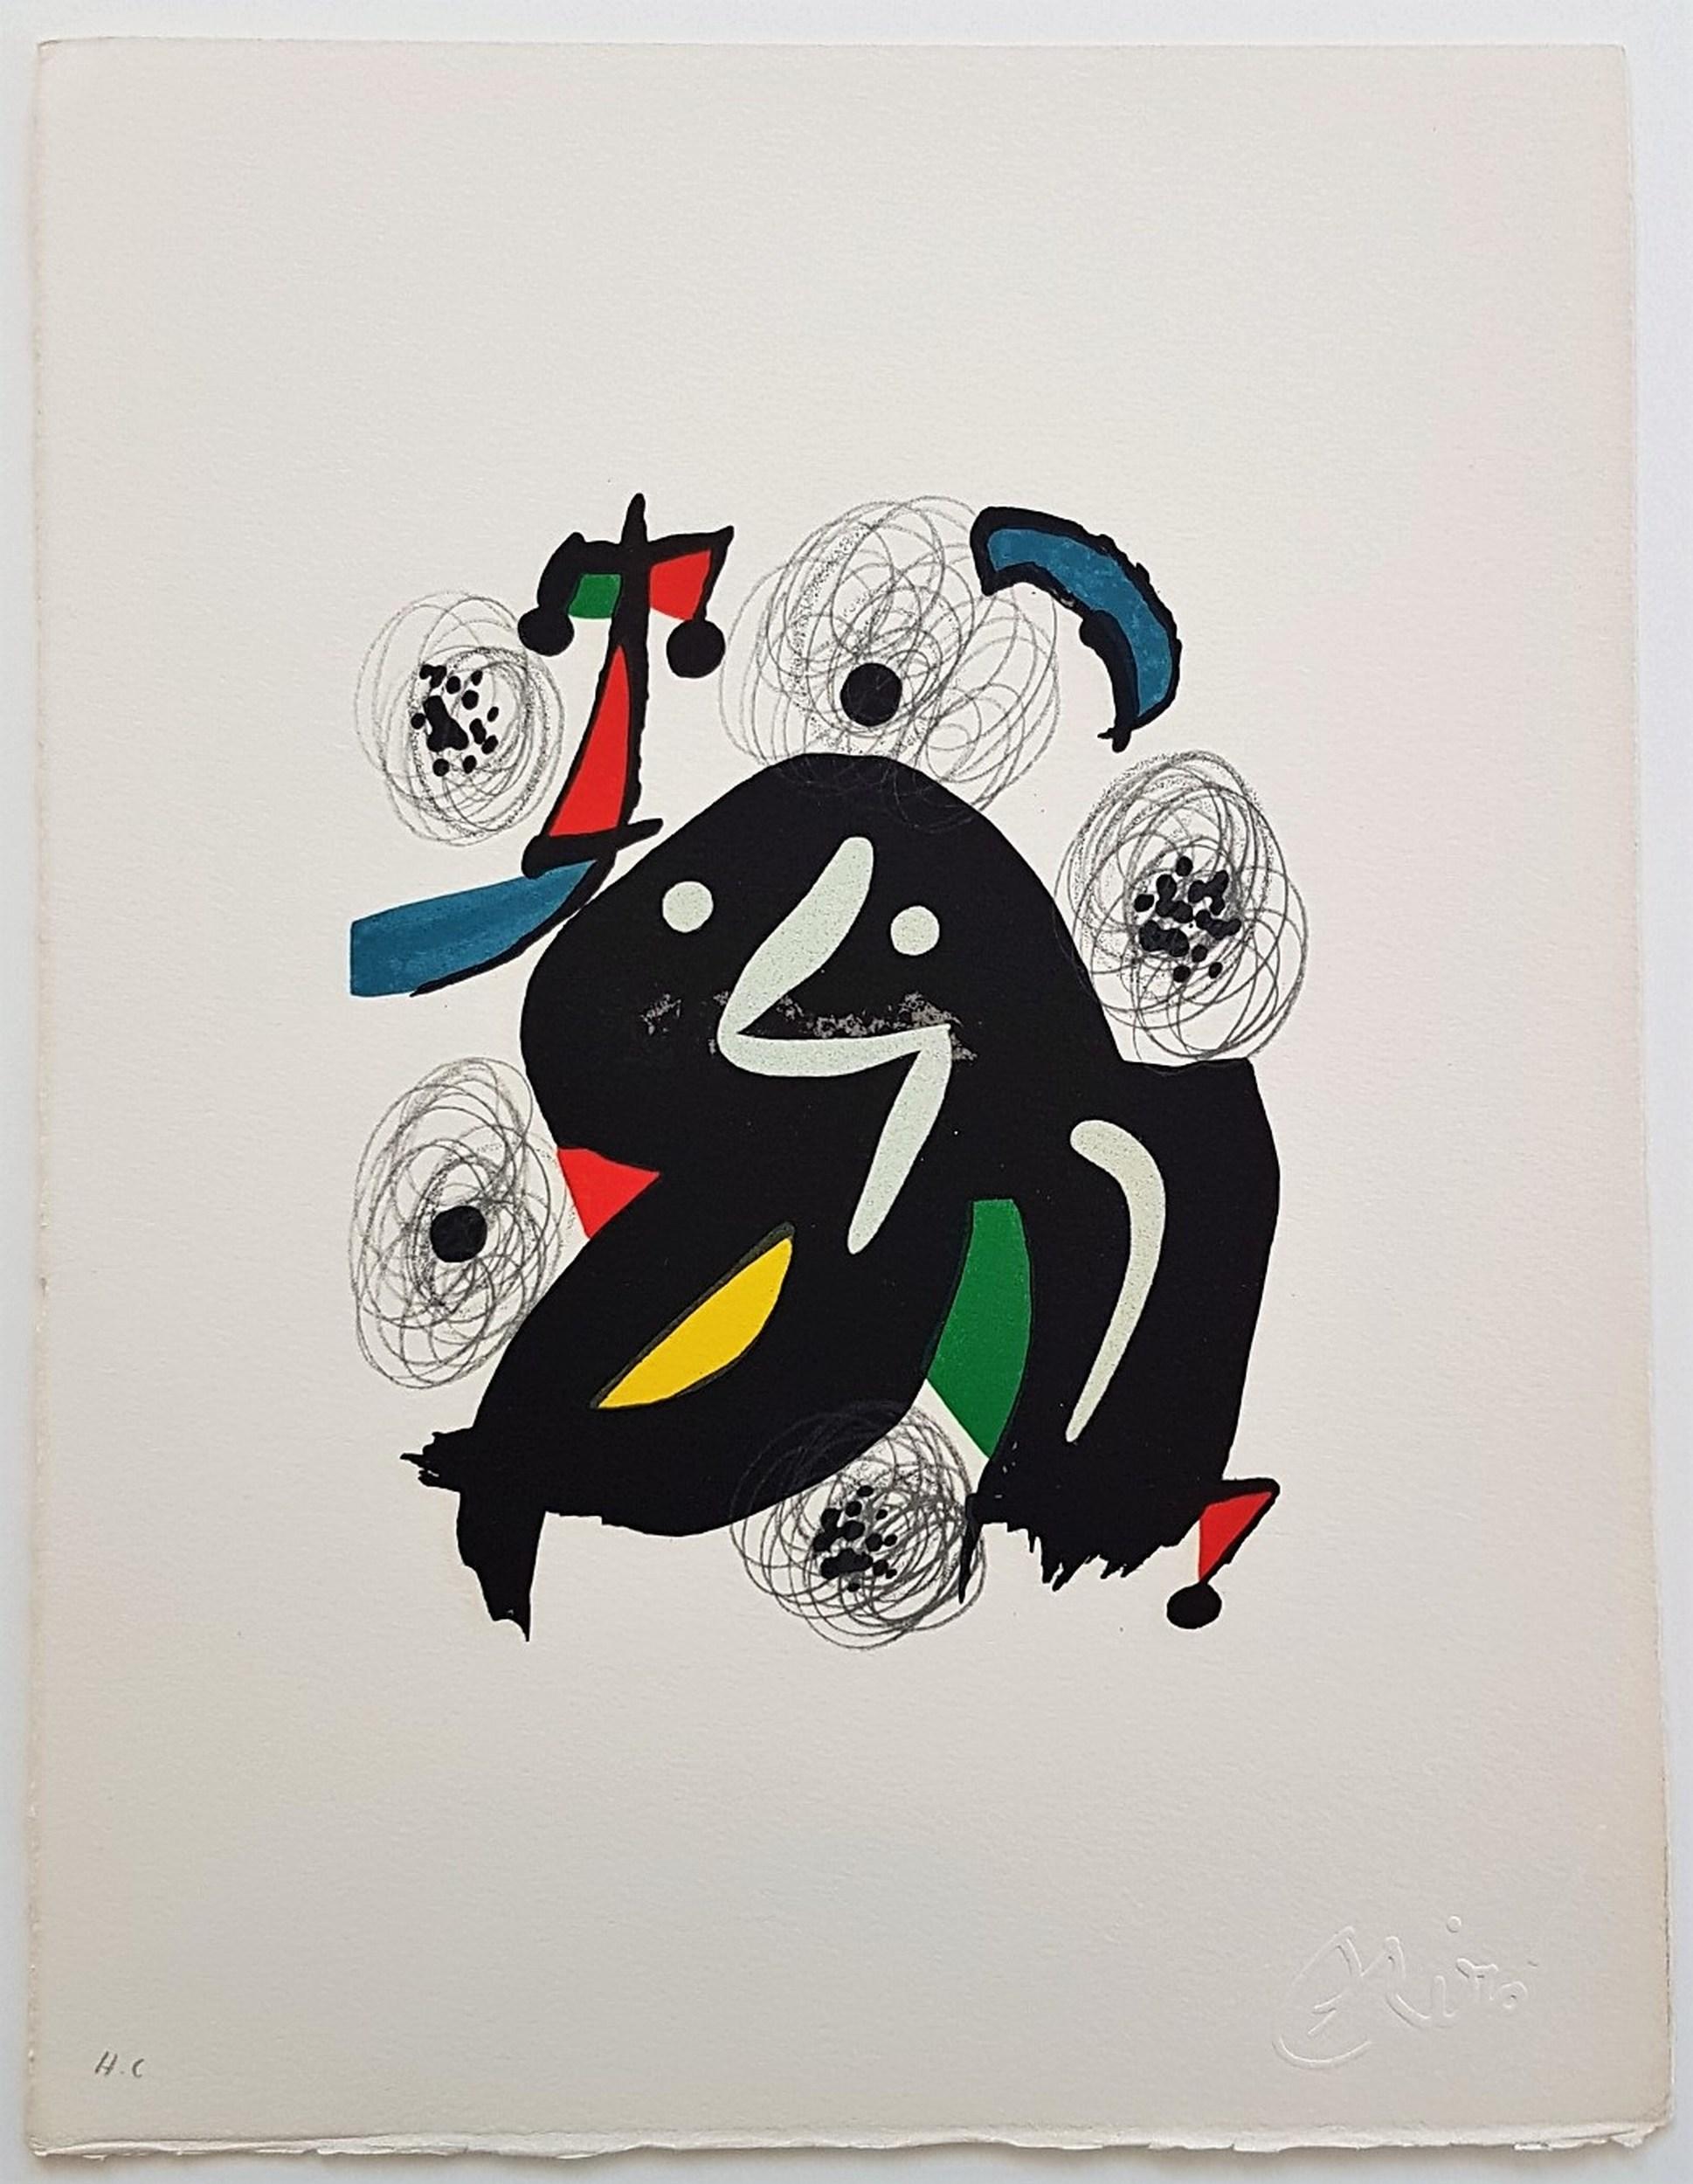 La Mélodie Acide - 4 (30% OFF LIST PRICE & $10 OFF SHIPPING - LIMITED TIME ONLY) - Print by Joan Miró